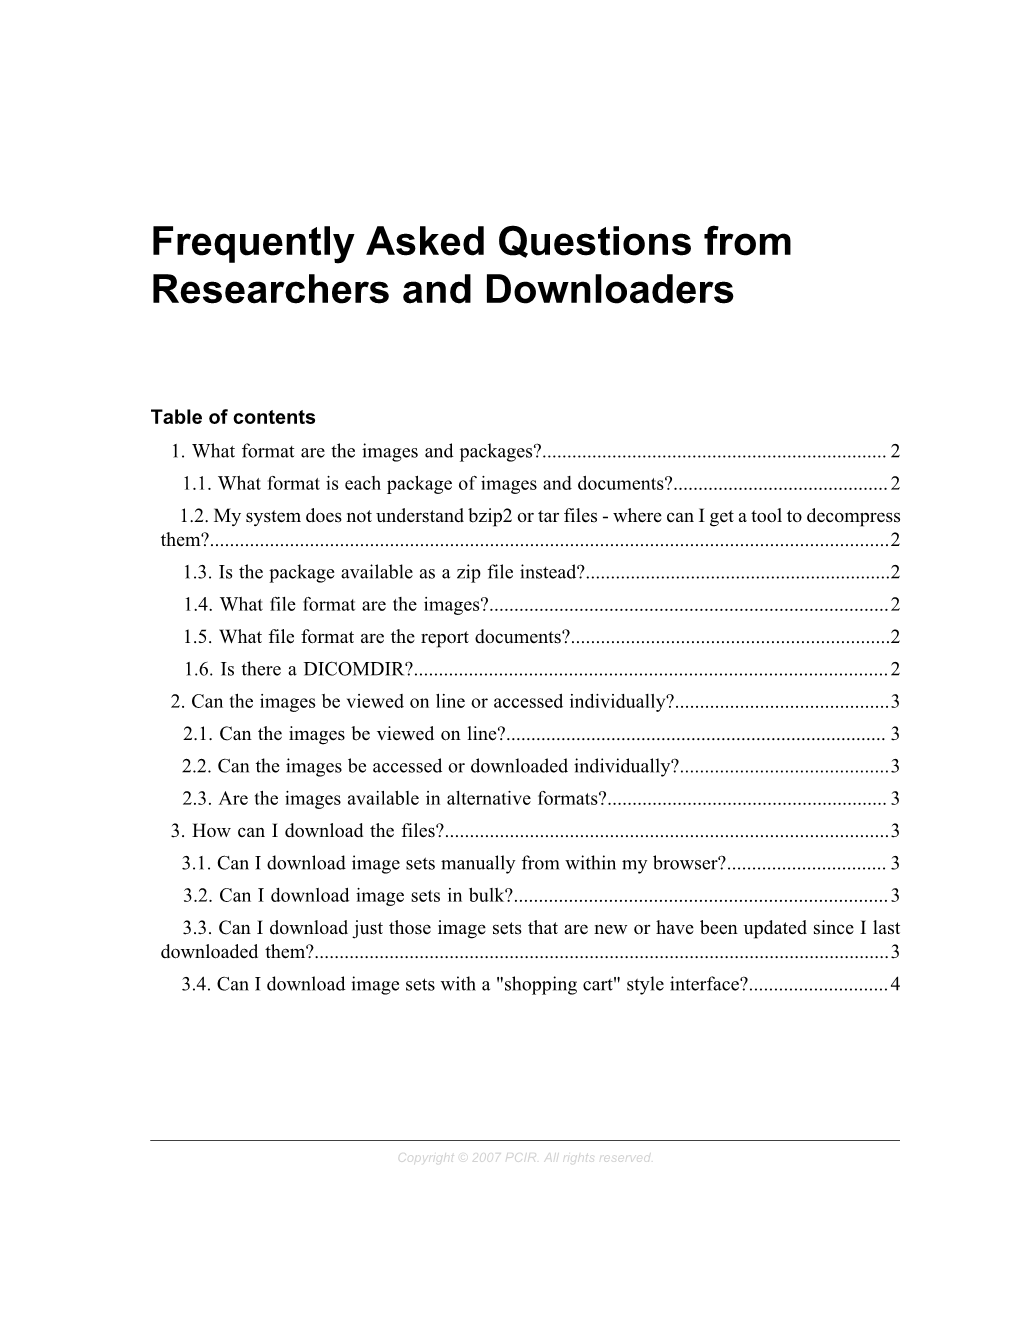 Frequently Asked Questions from Researchers and Downloaders